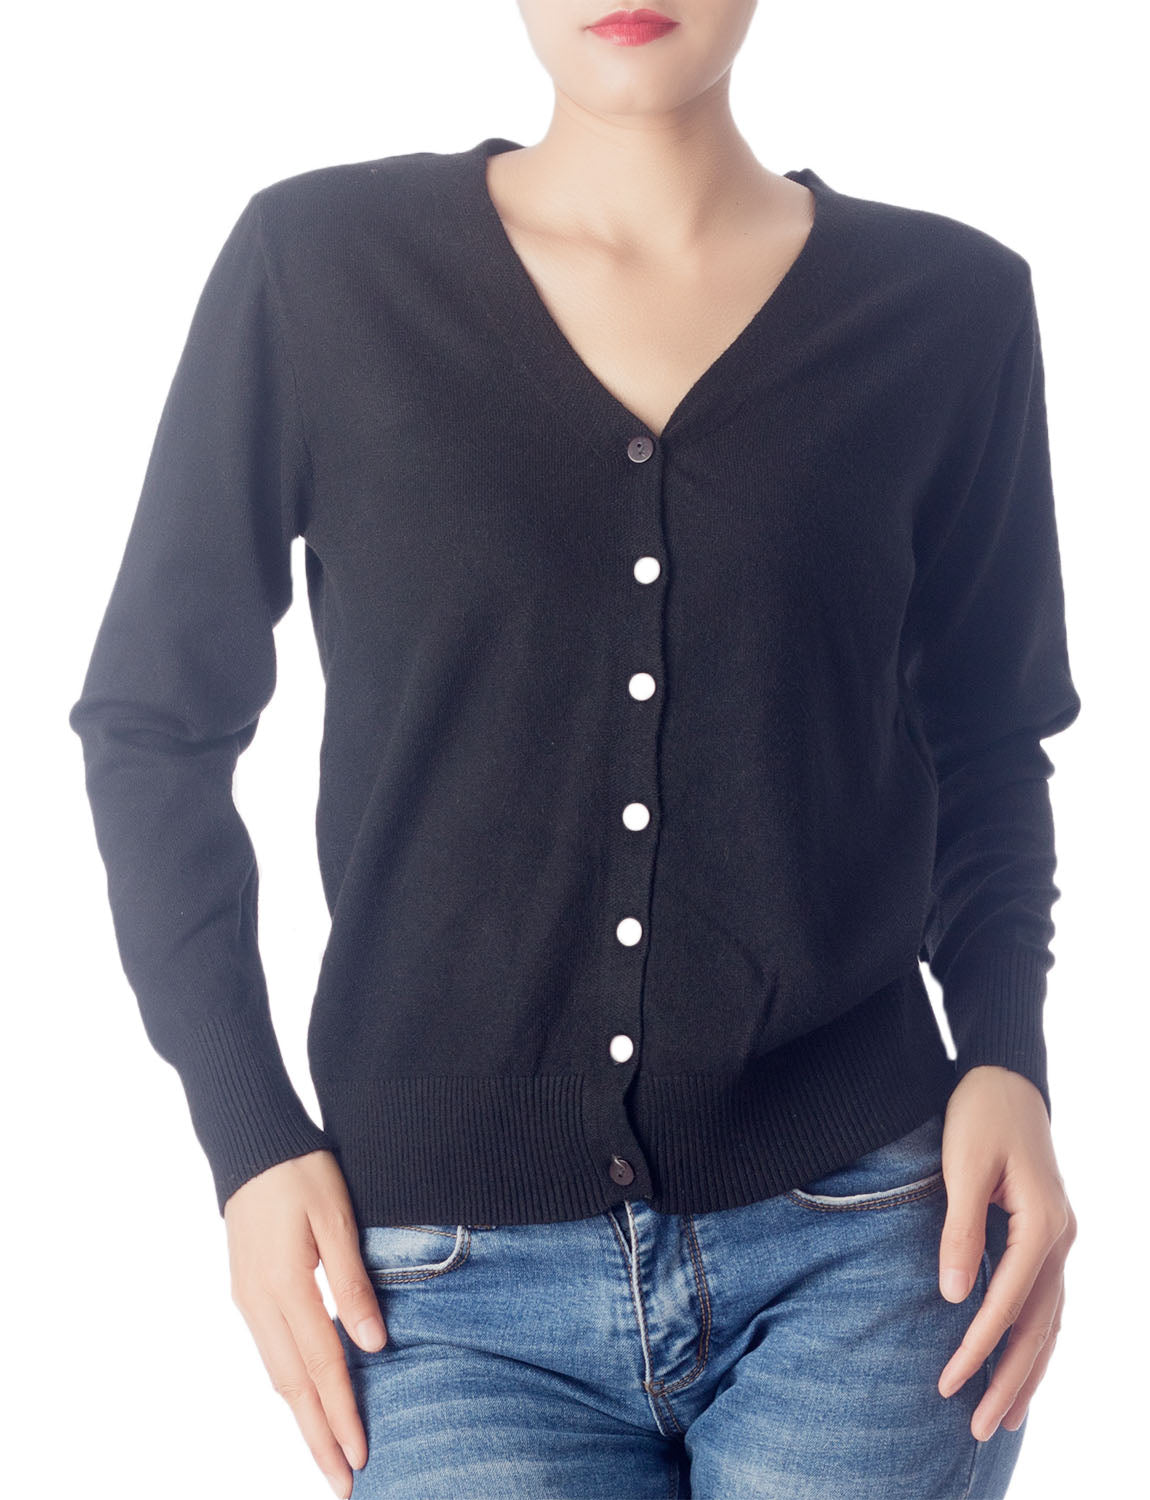 Women's Fashion Button Up Open Front Sweater Ladys Lightweight Cardigan